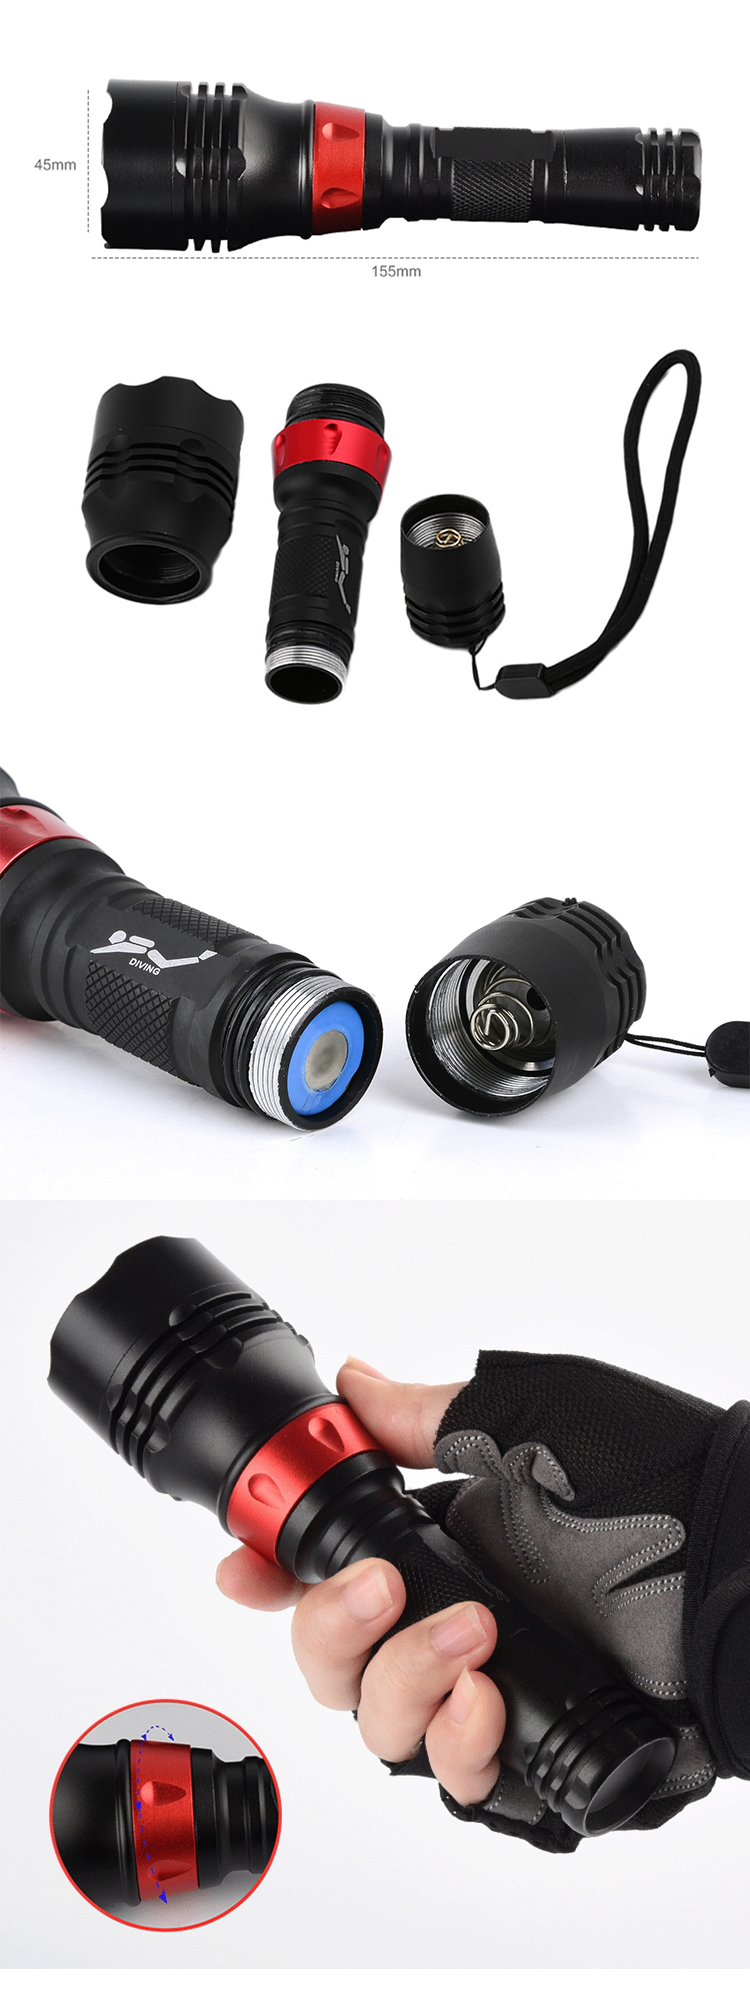 T6 Mini LED Lamp Adjustable Zoom Focus Torch Waterproof light Fishing Camping Riding Underwater Diving Flashlight